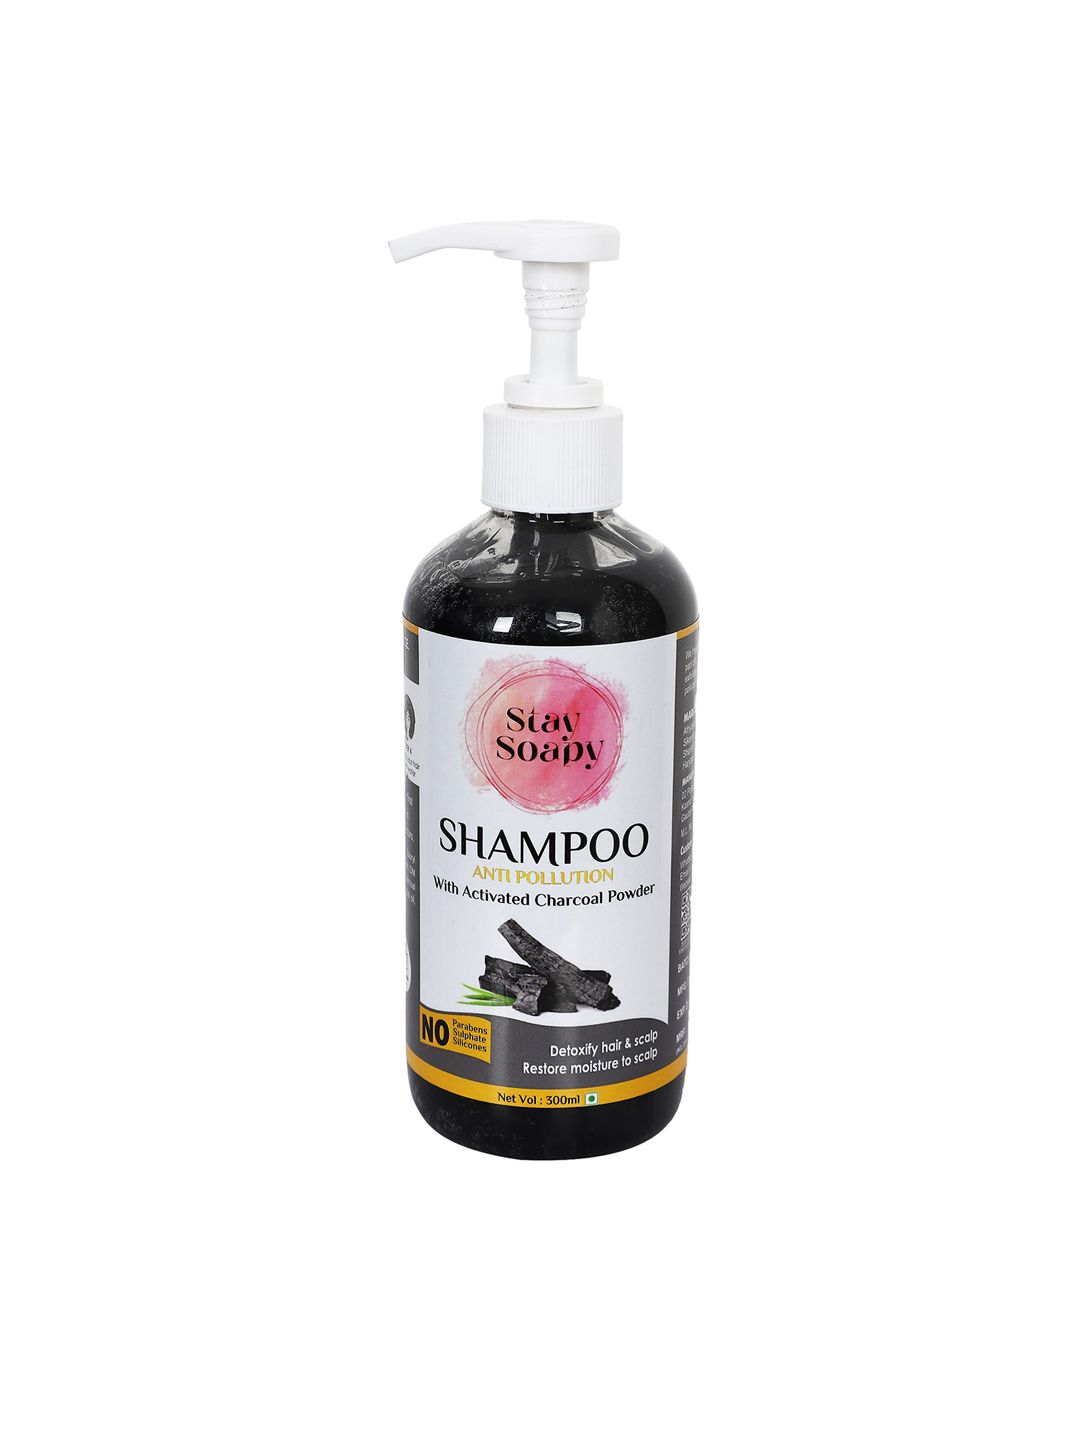 Stay Soapy Anti Pollution Shampoo with Activated Charcoal Powder - 300 ml Price in India